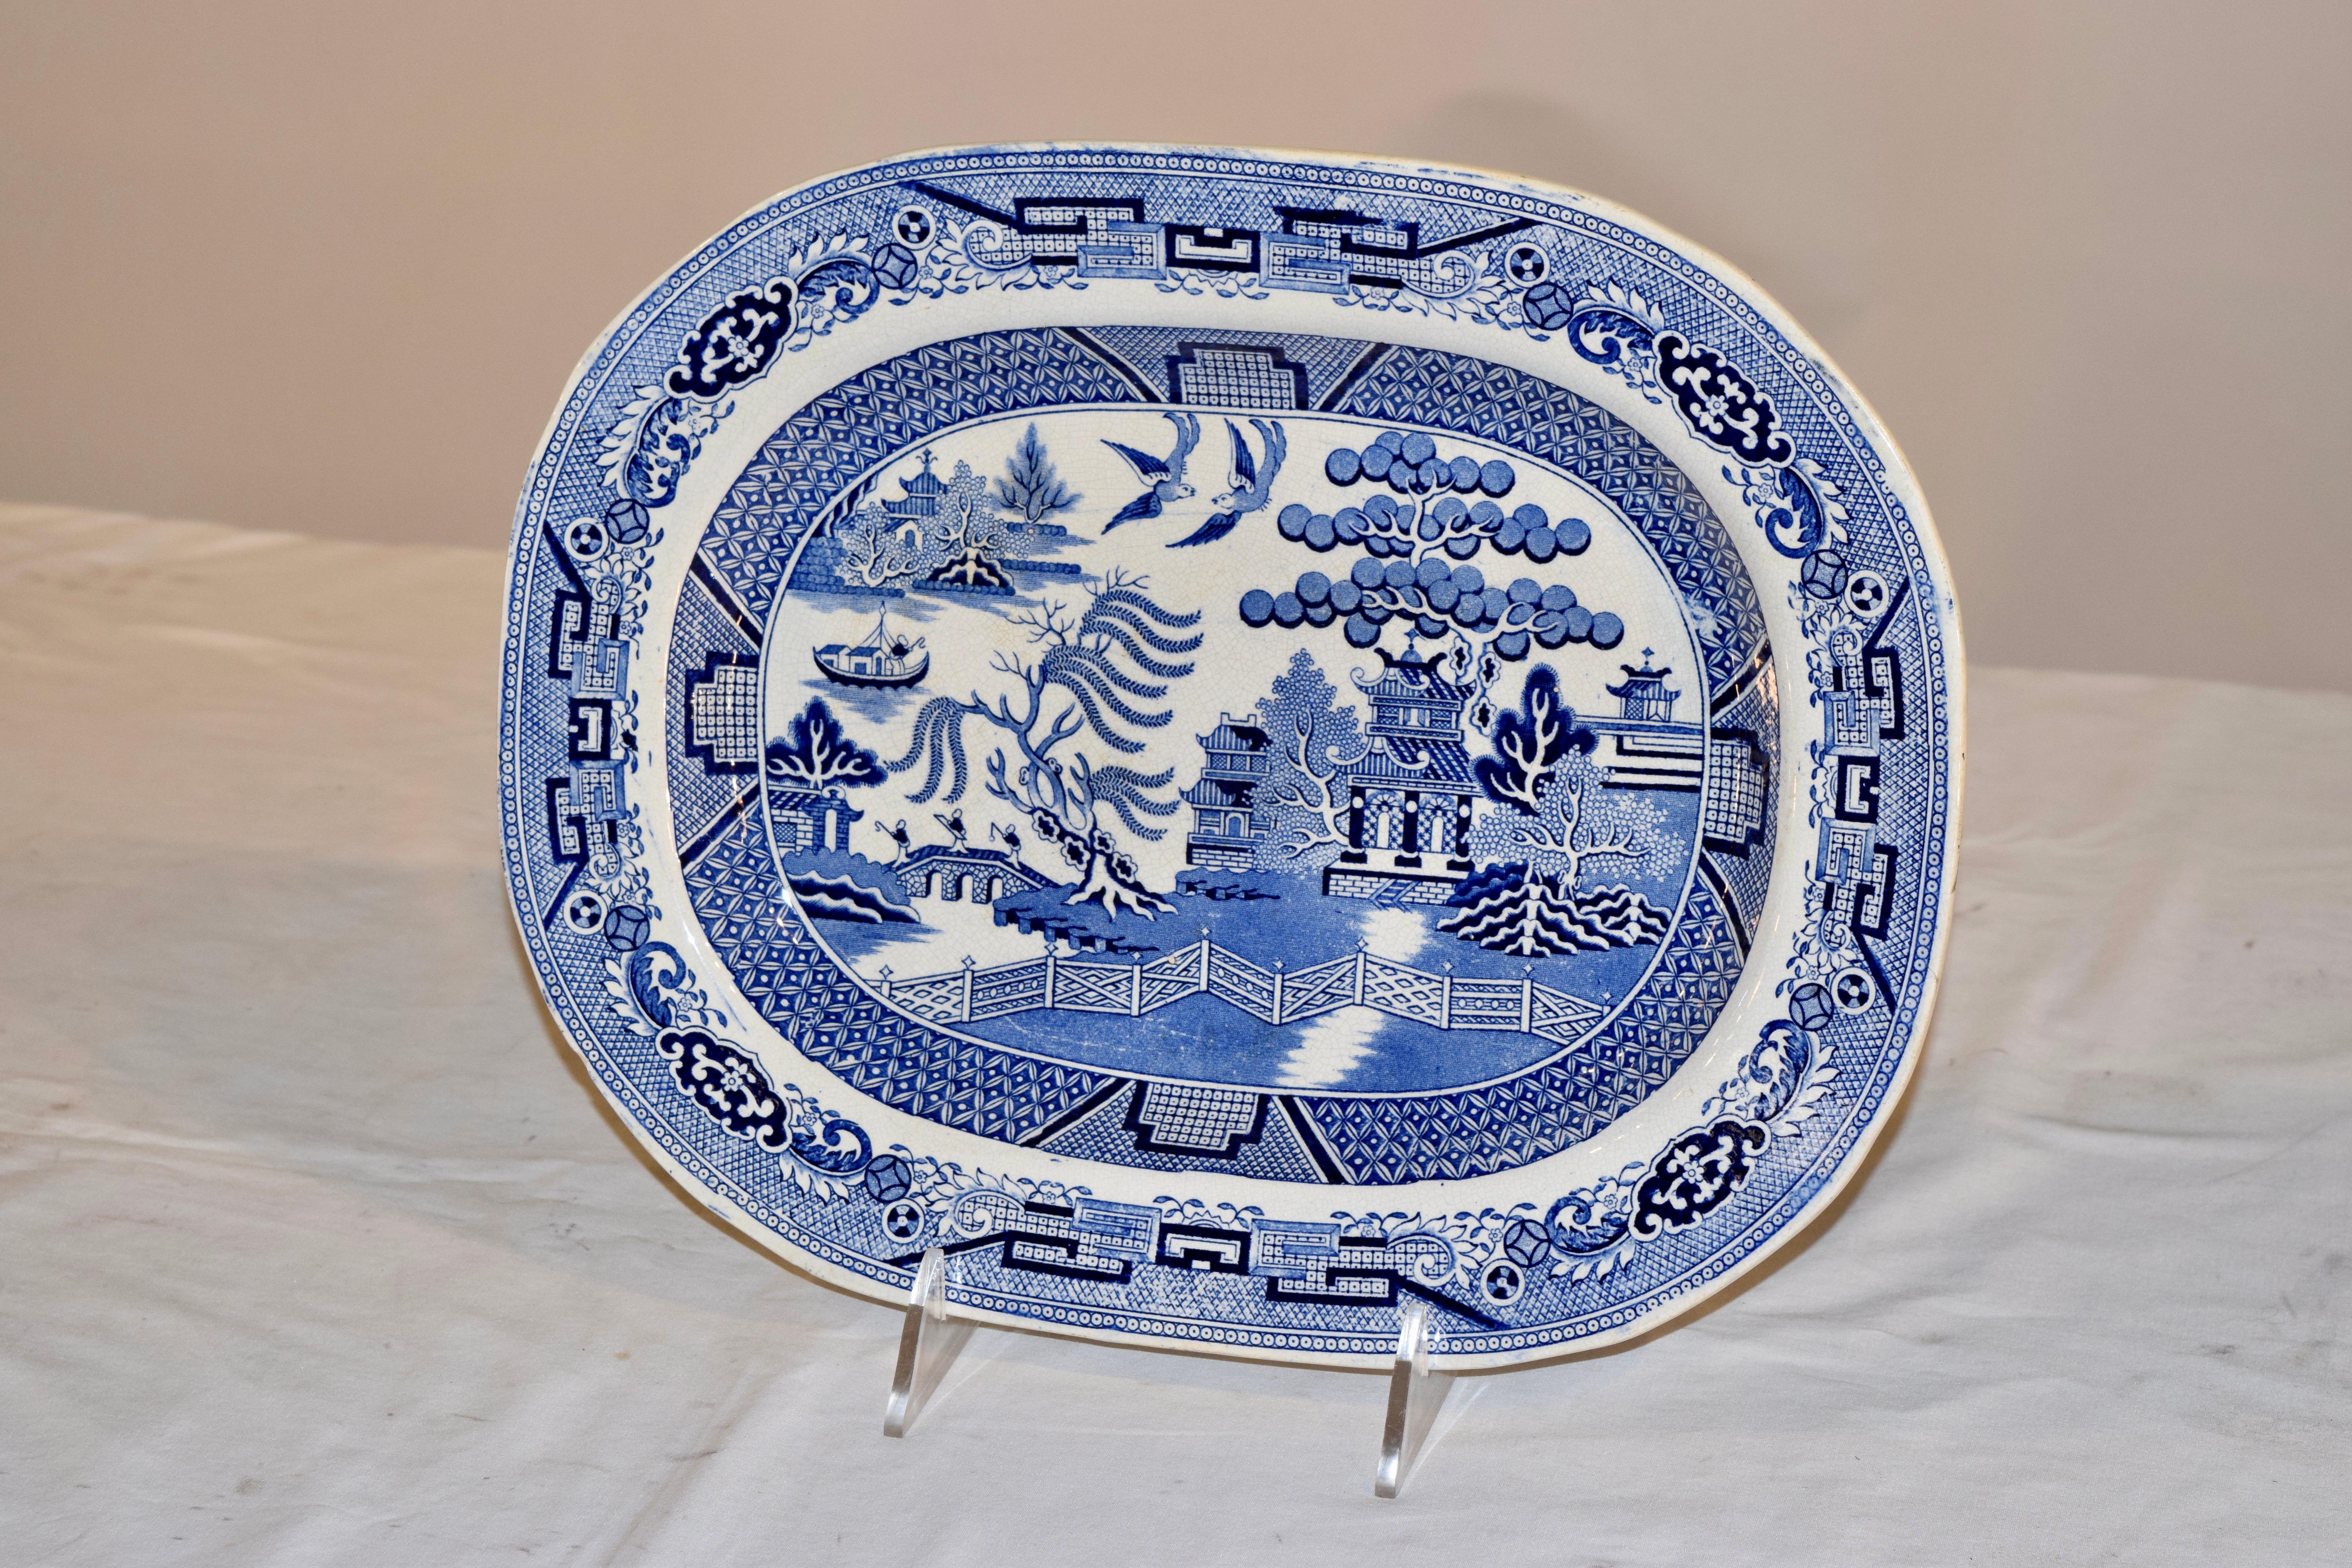 19th century Staffordshire platter in the highly collectible 